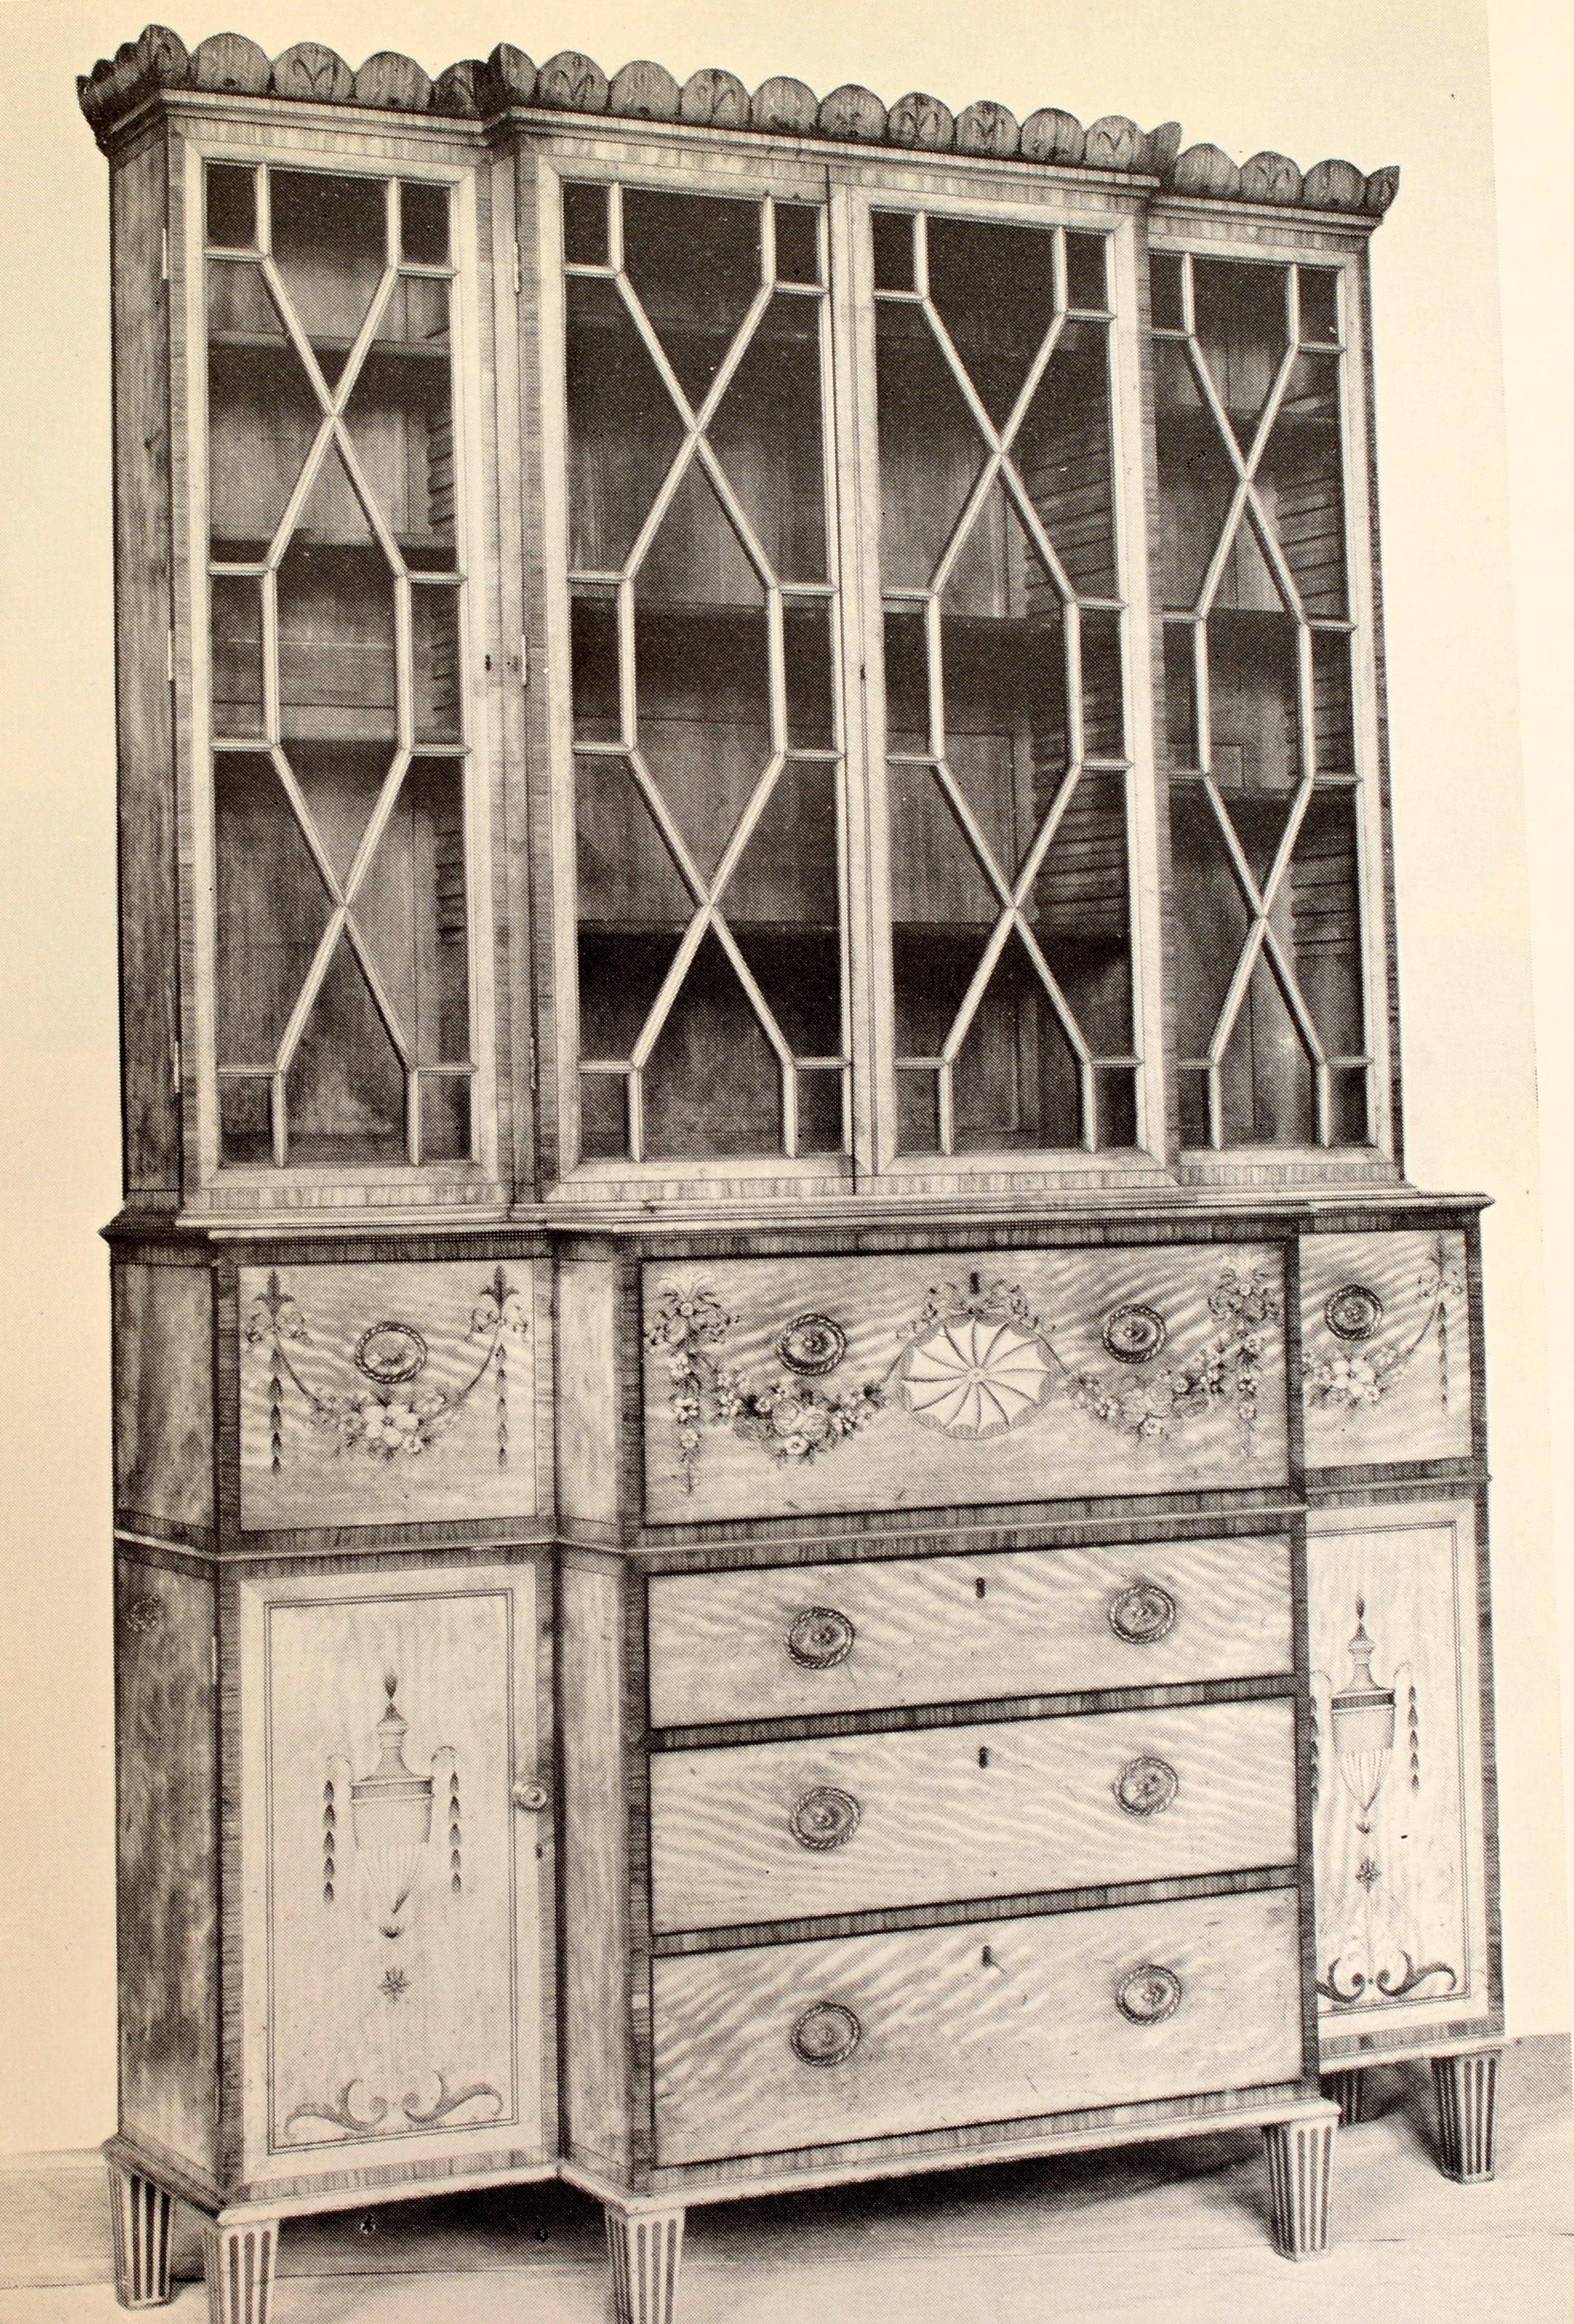 English Furniture from Middle Ages to Modern Times by Margaret Taylor, 1st Ed For Sale 8